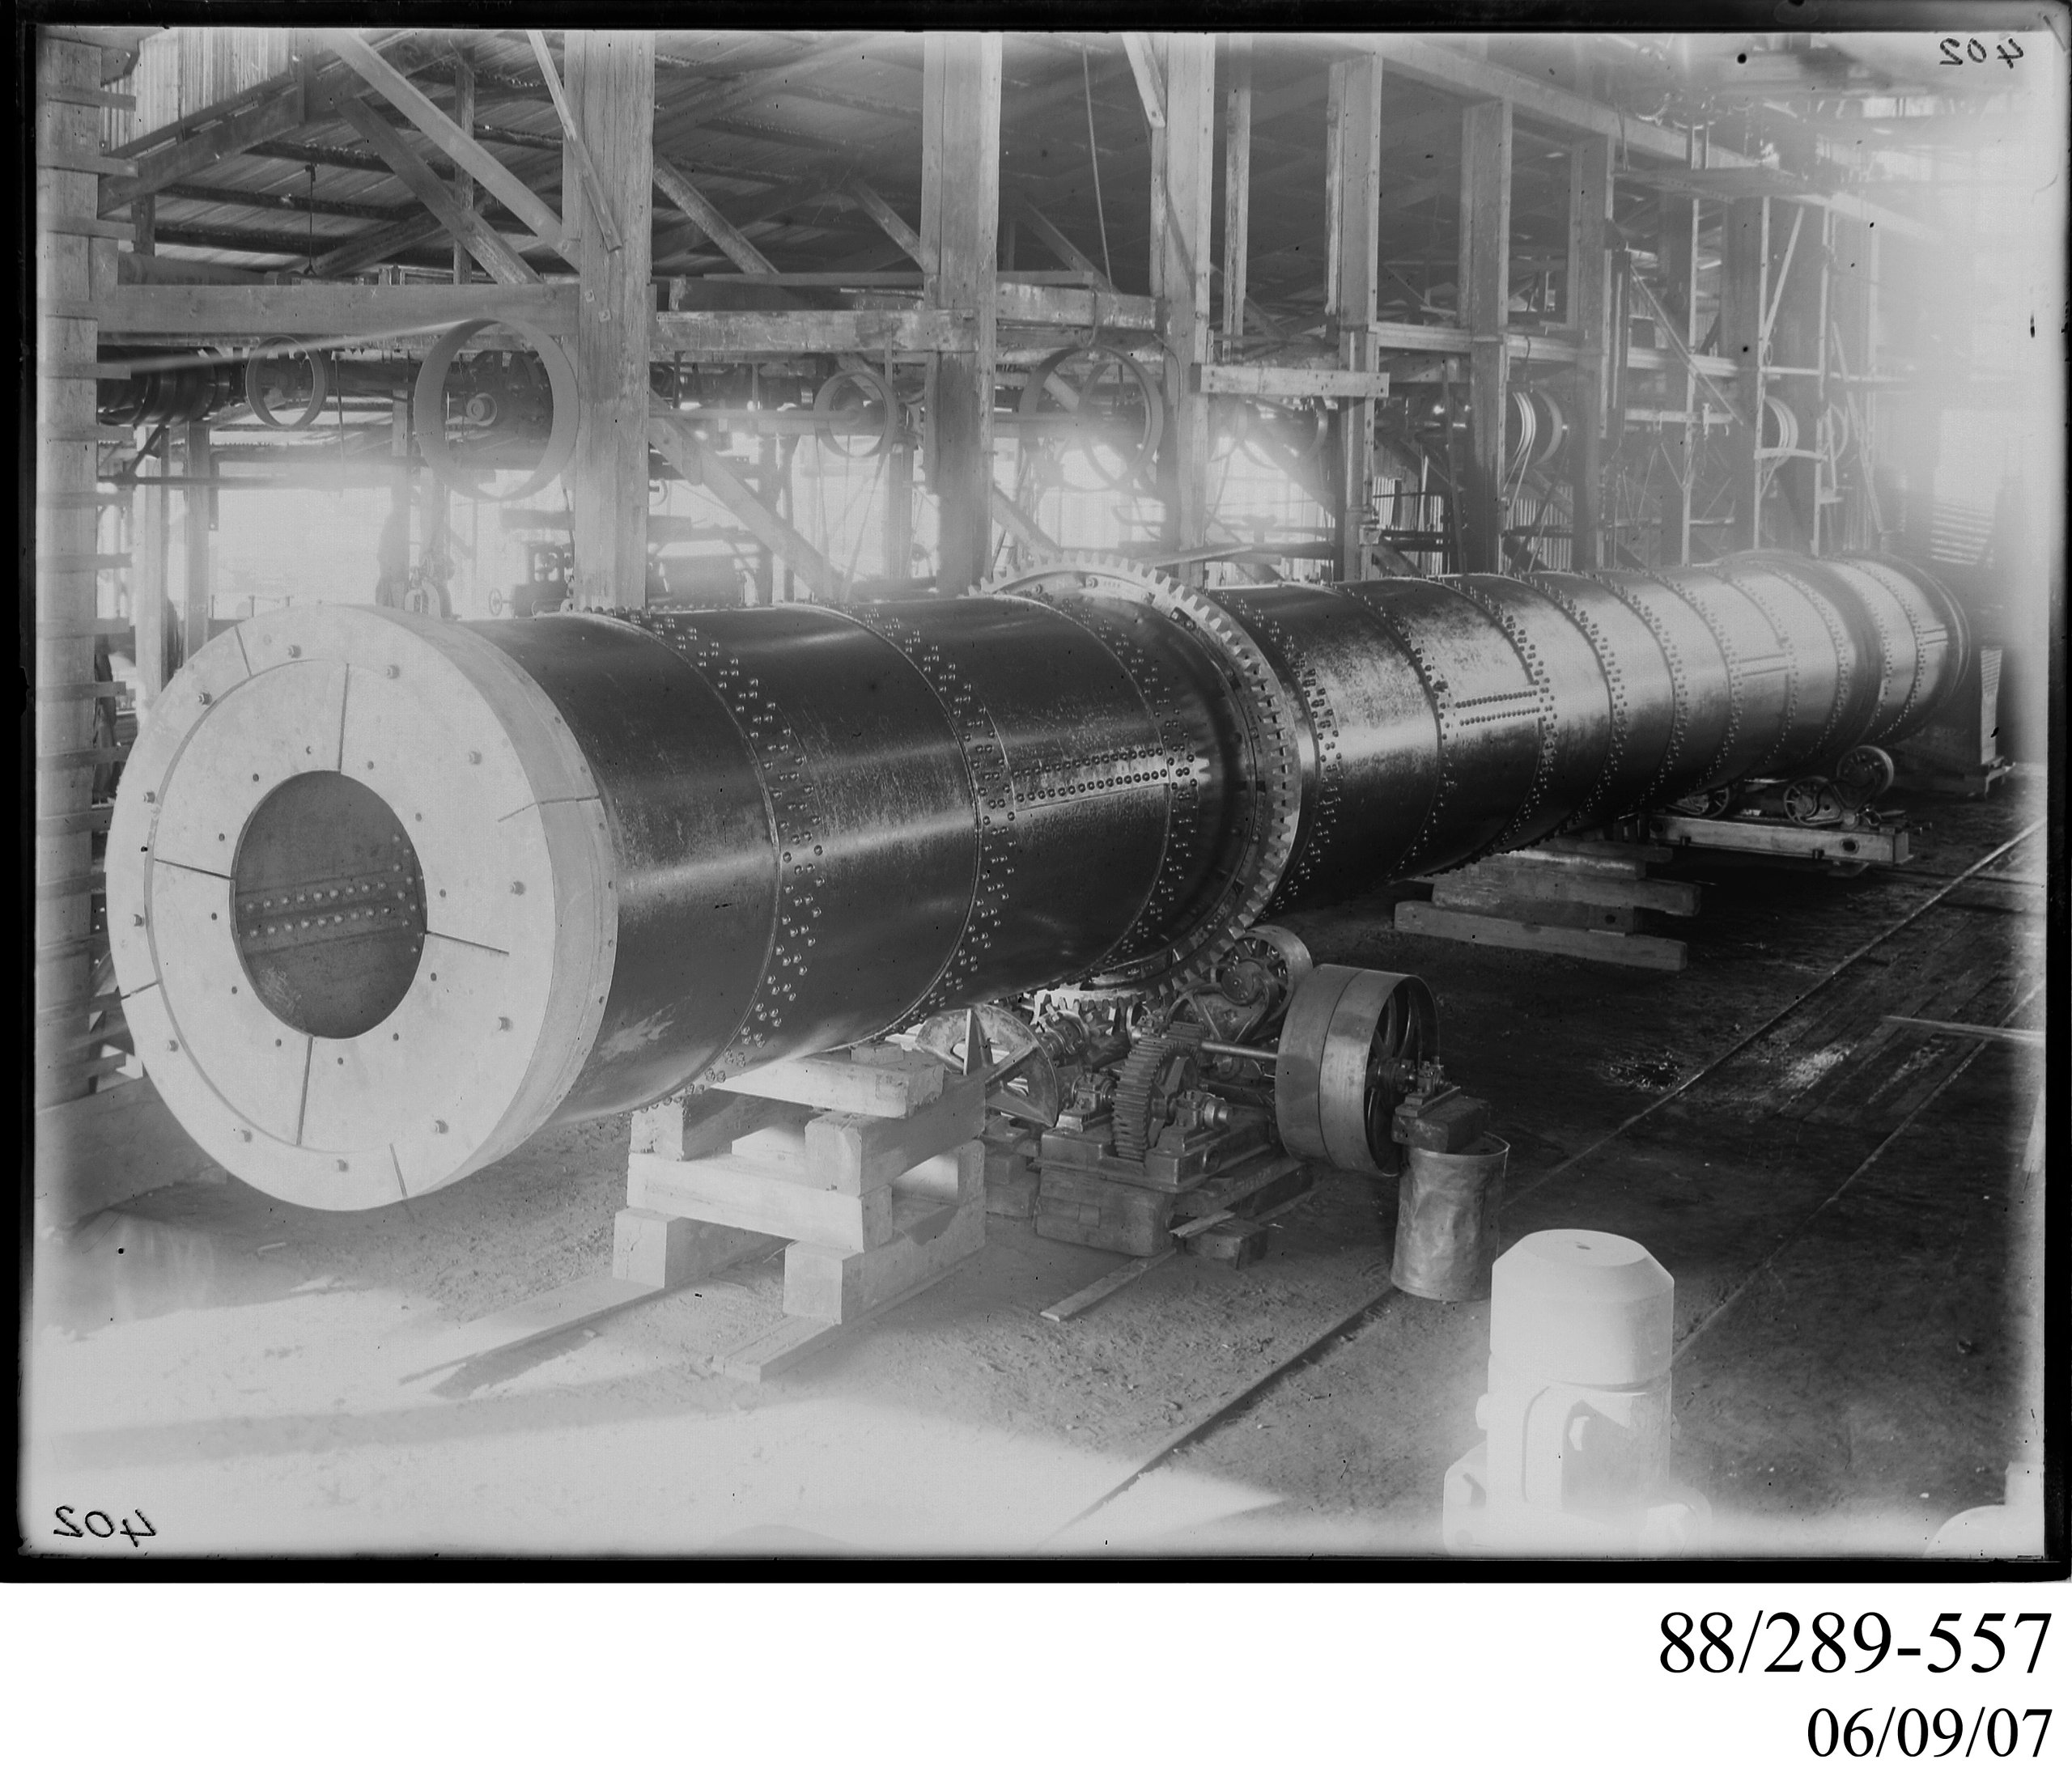 Glass plate negative of rotary kiln inside Clyde works